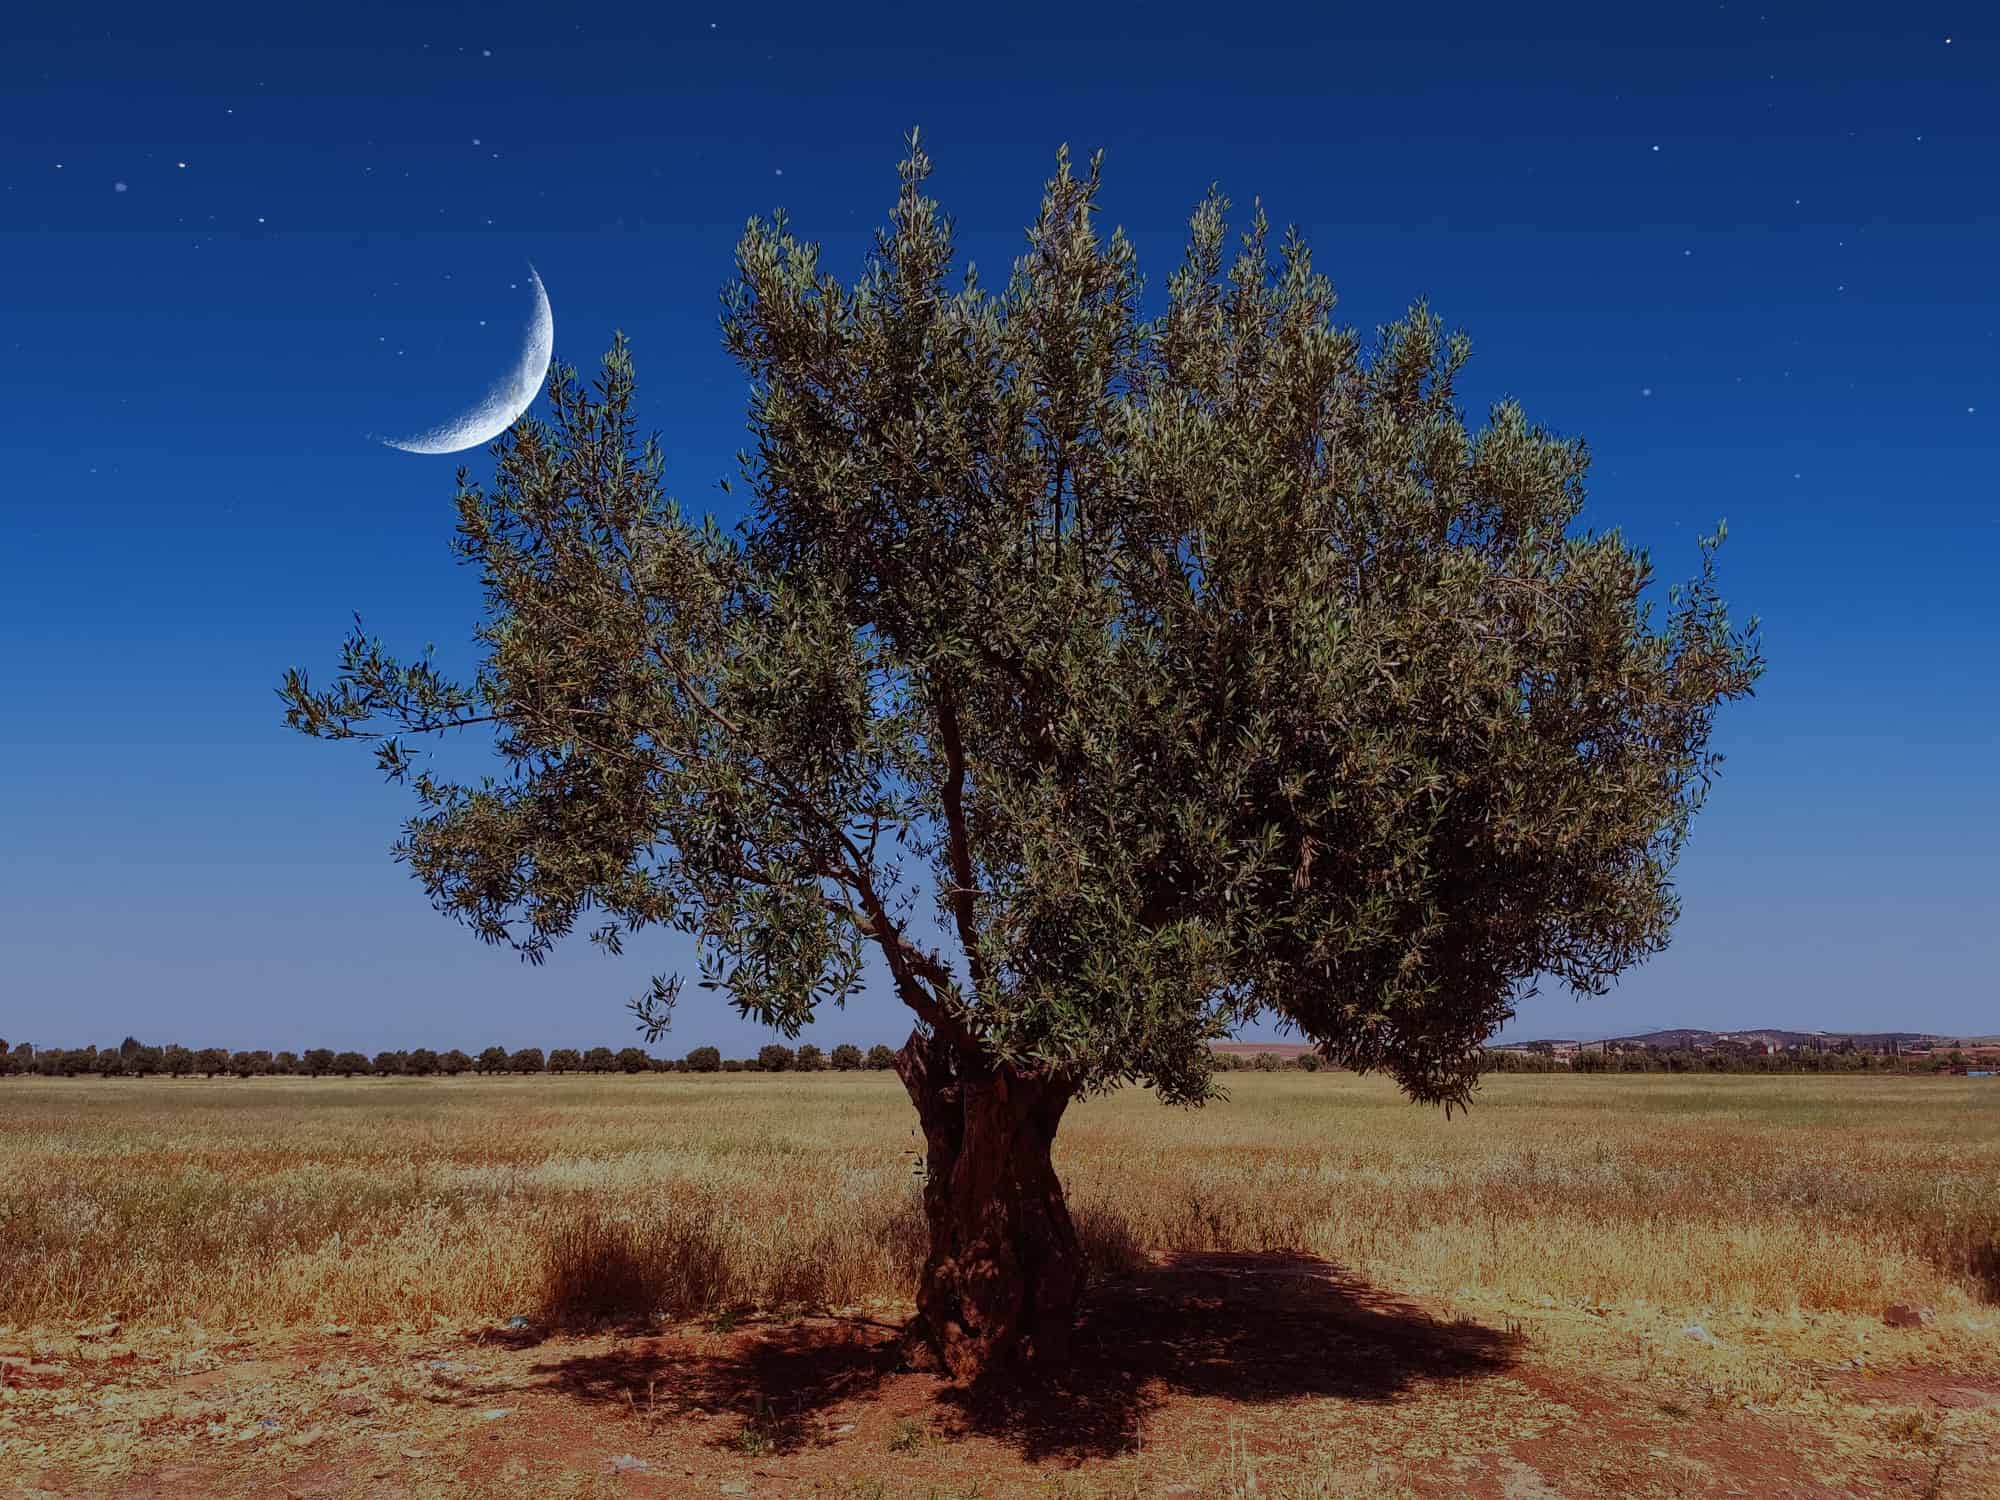 Beautiful olive tree (olivea europaea) alone in a field by night. Remarkable evening crescent moon. Picture taken in Hamman Bou Hadjar, a small village in the North West of Algeria.